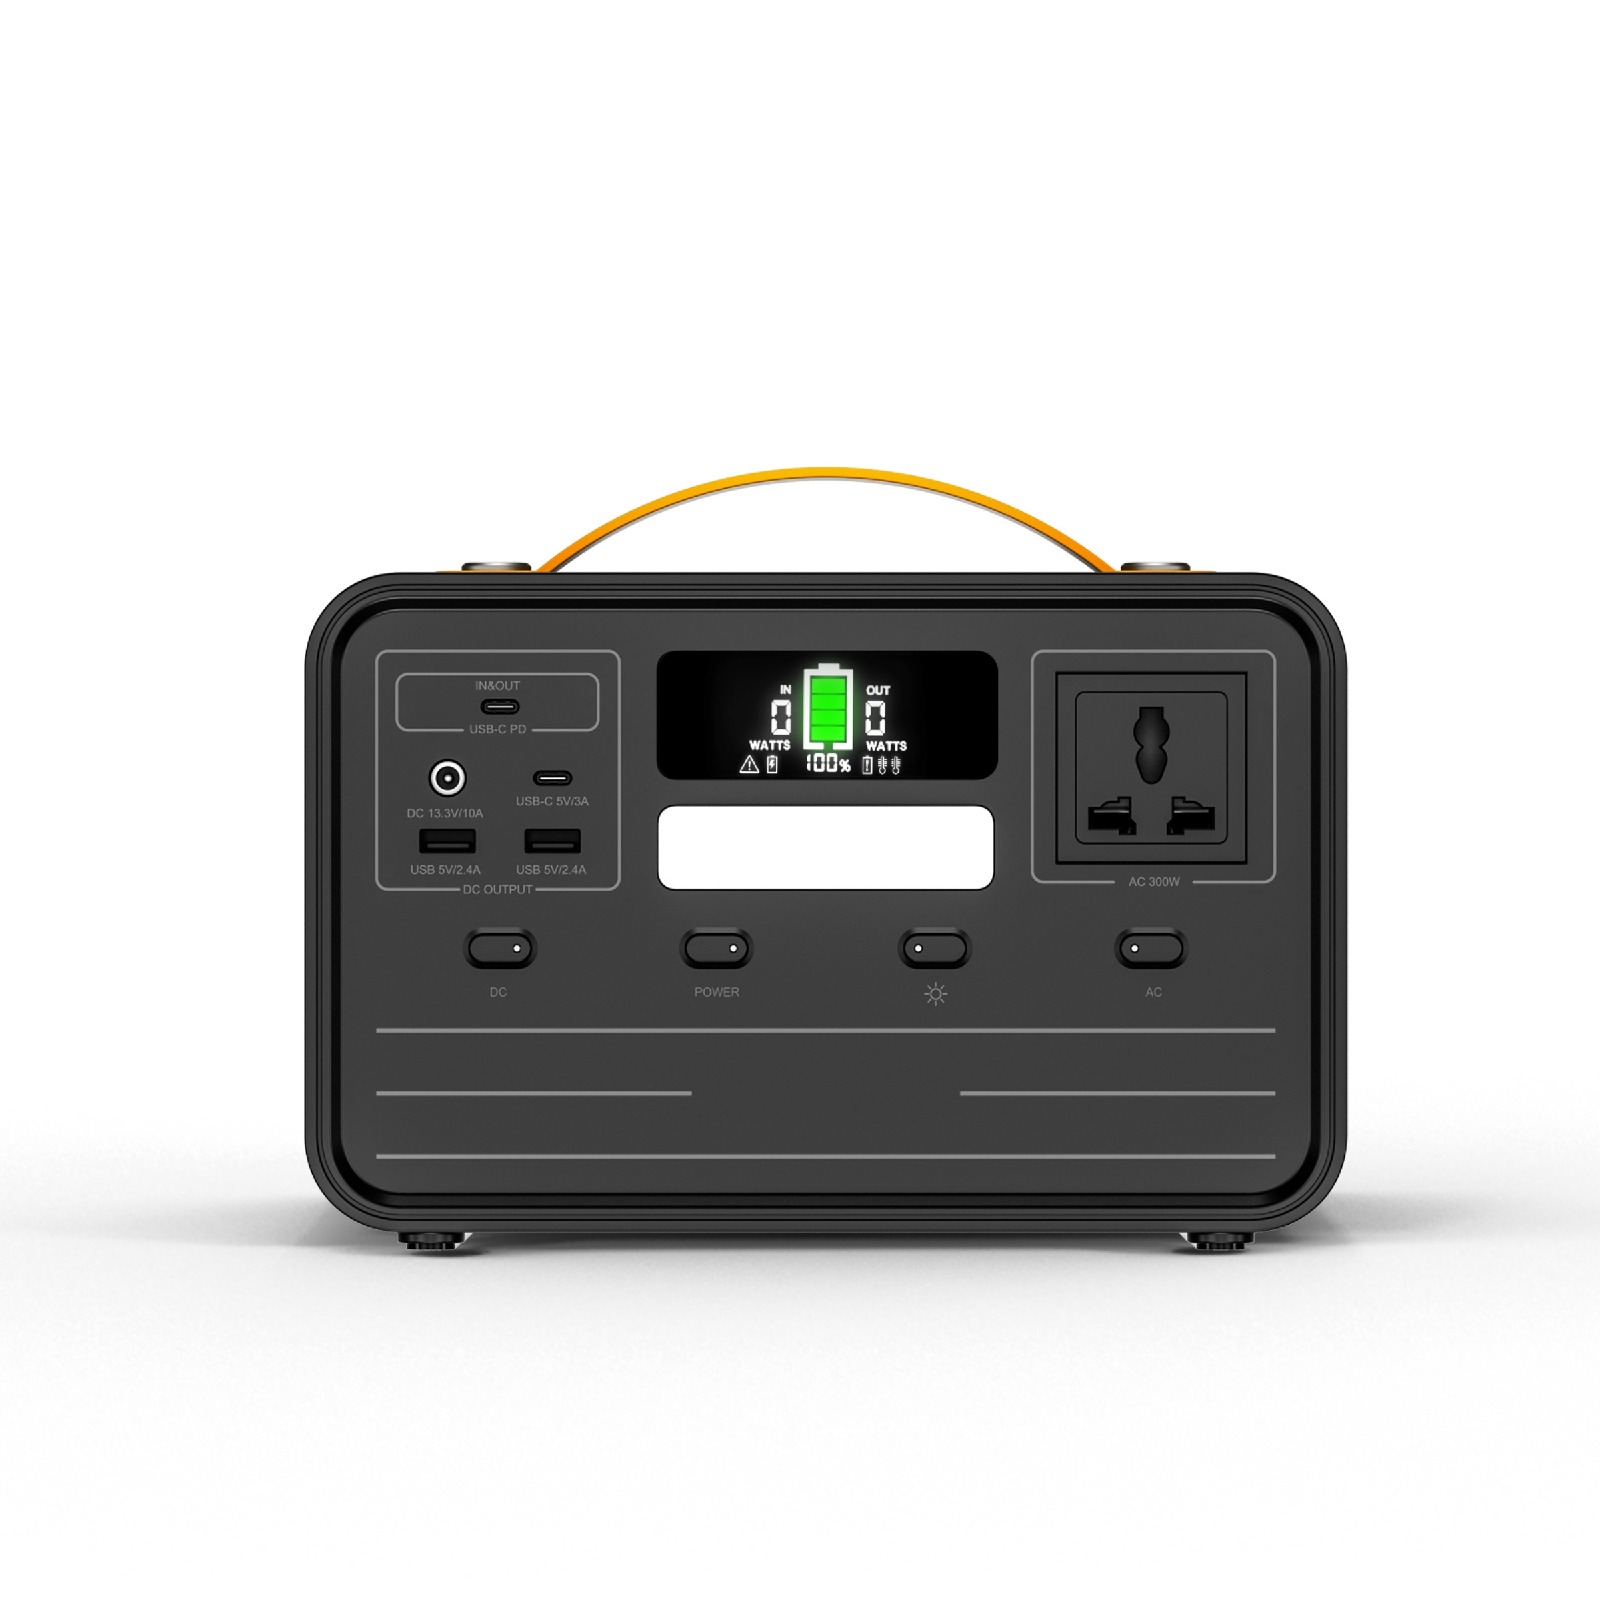 Digitek Power Station DPS 300W /Portable AC/DC Power Station  Compatible with AC/DC Electronic Devices